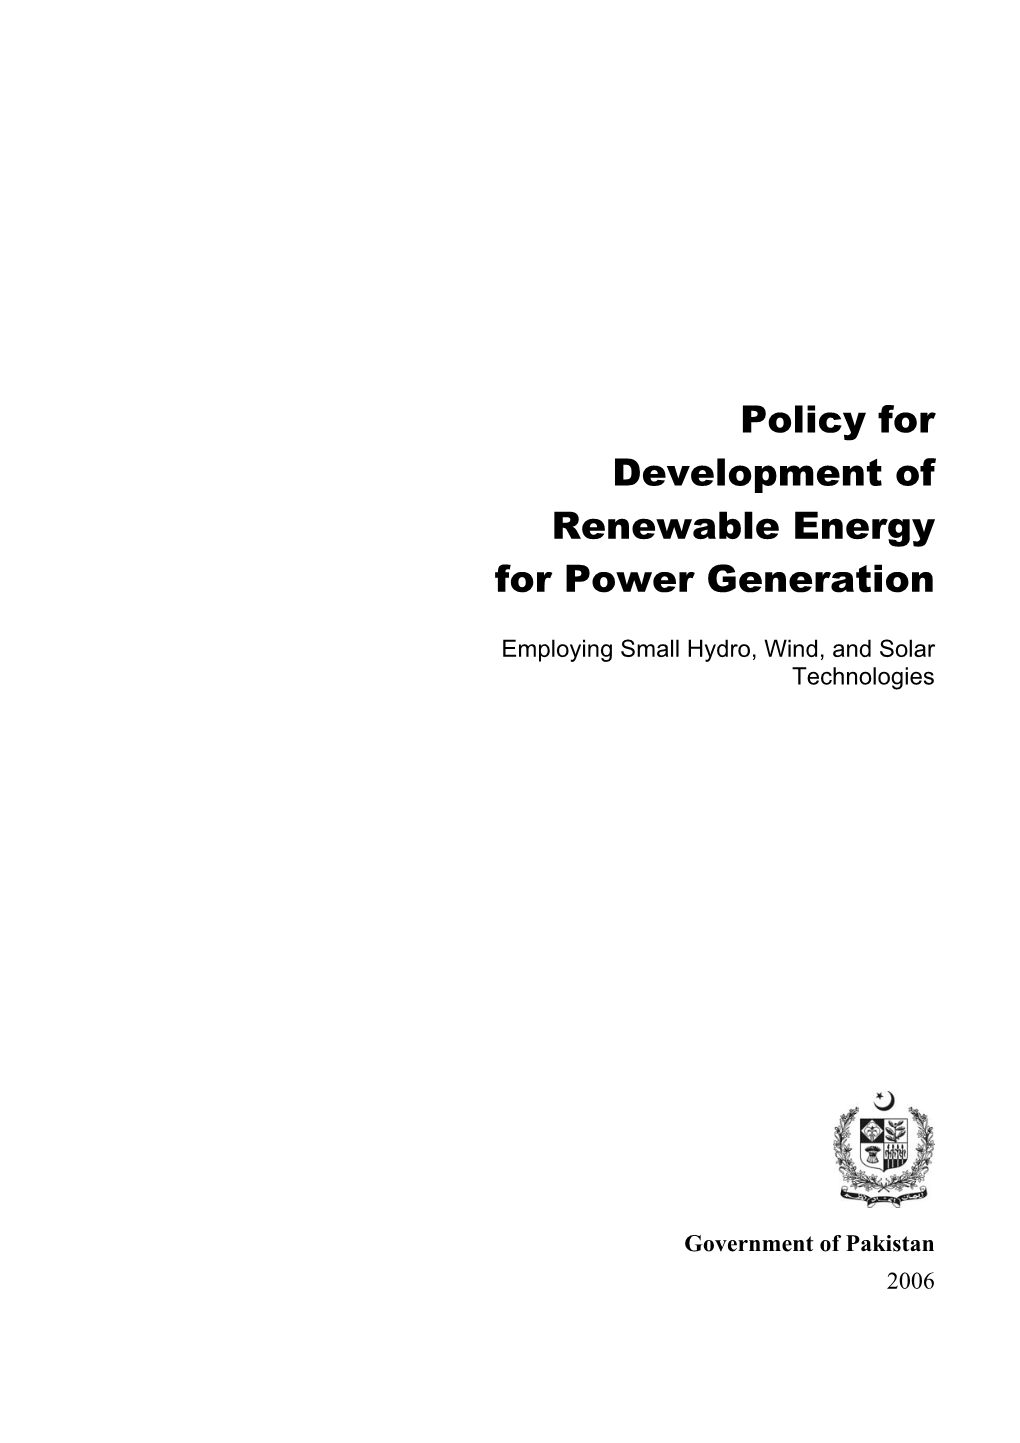 Policy for Development of Renewable Energy for Power Generation